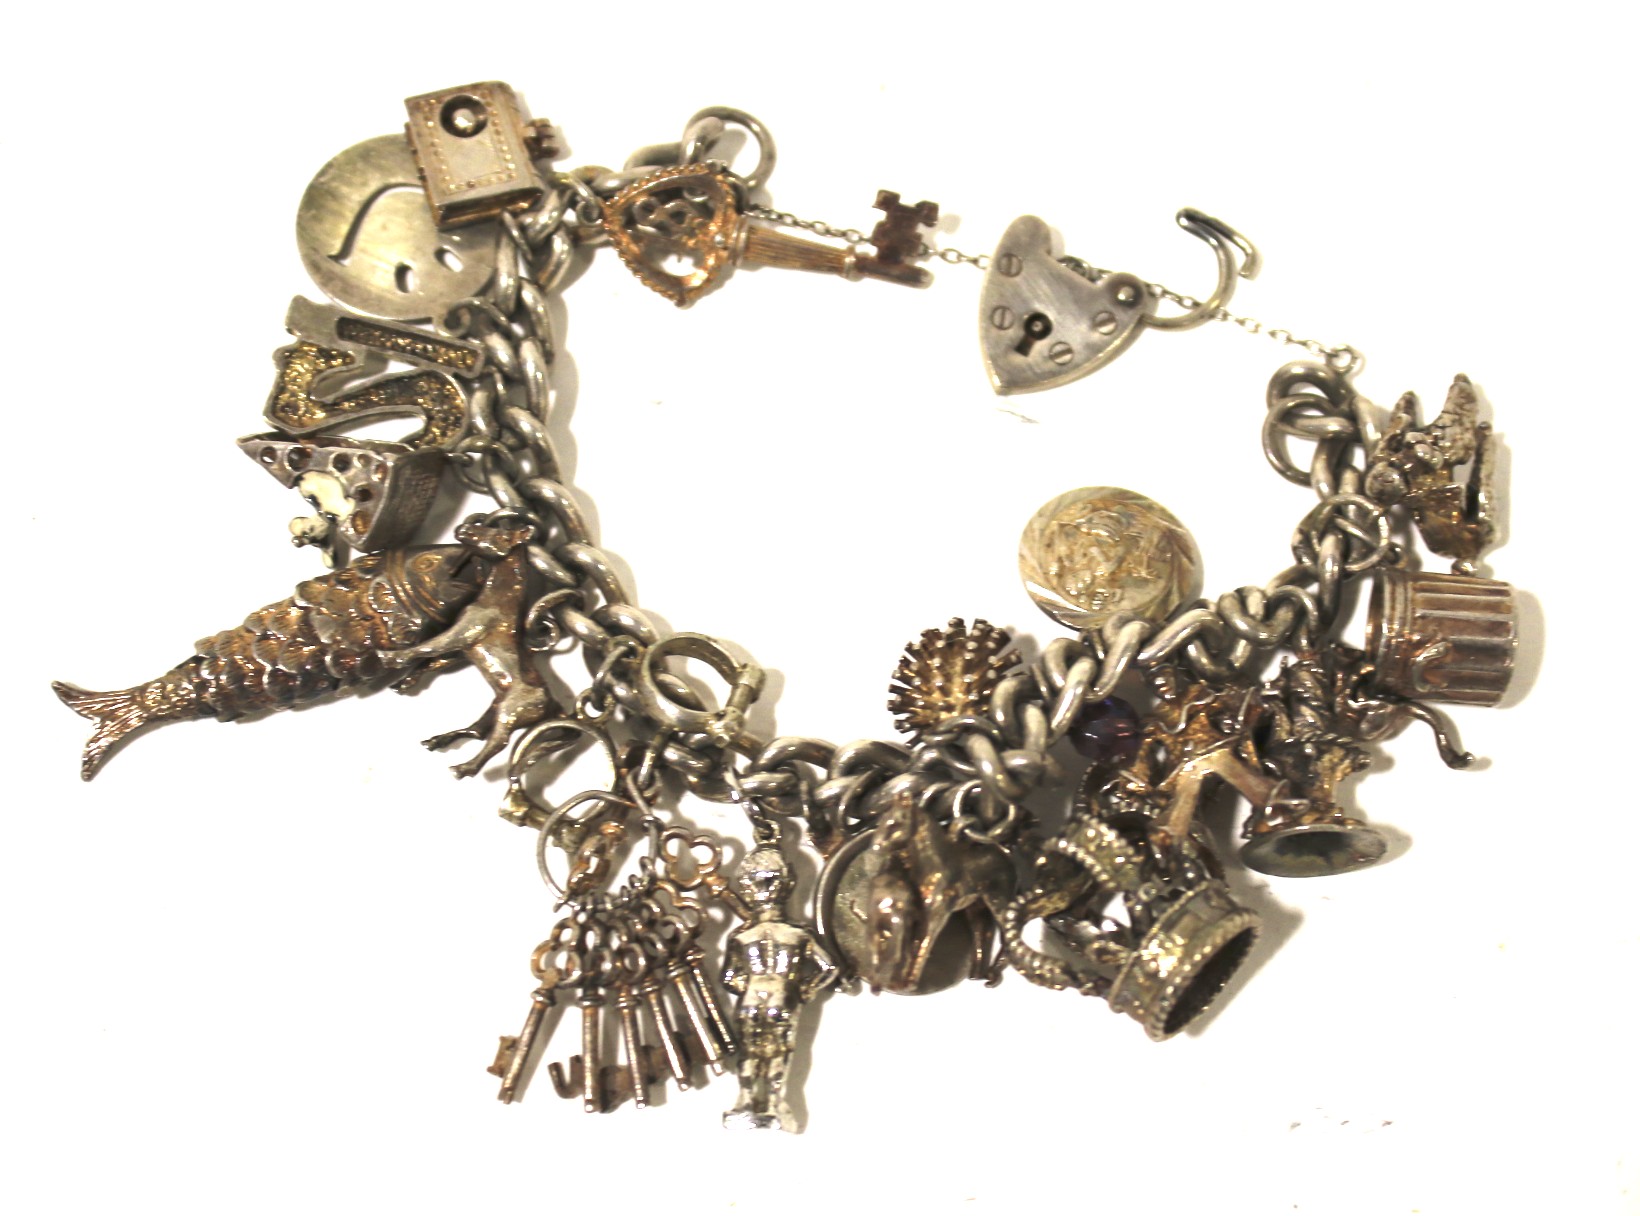 A silver charm bracelet with various silver and white metal charms.